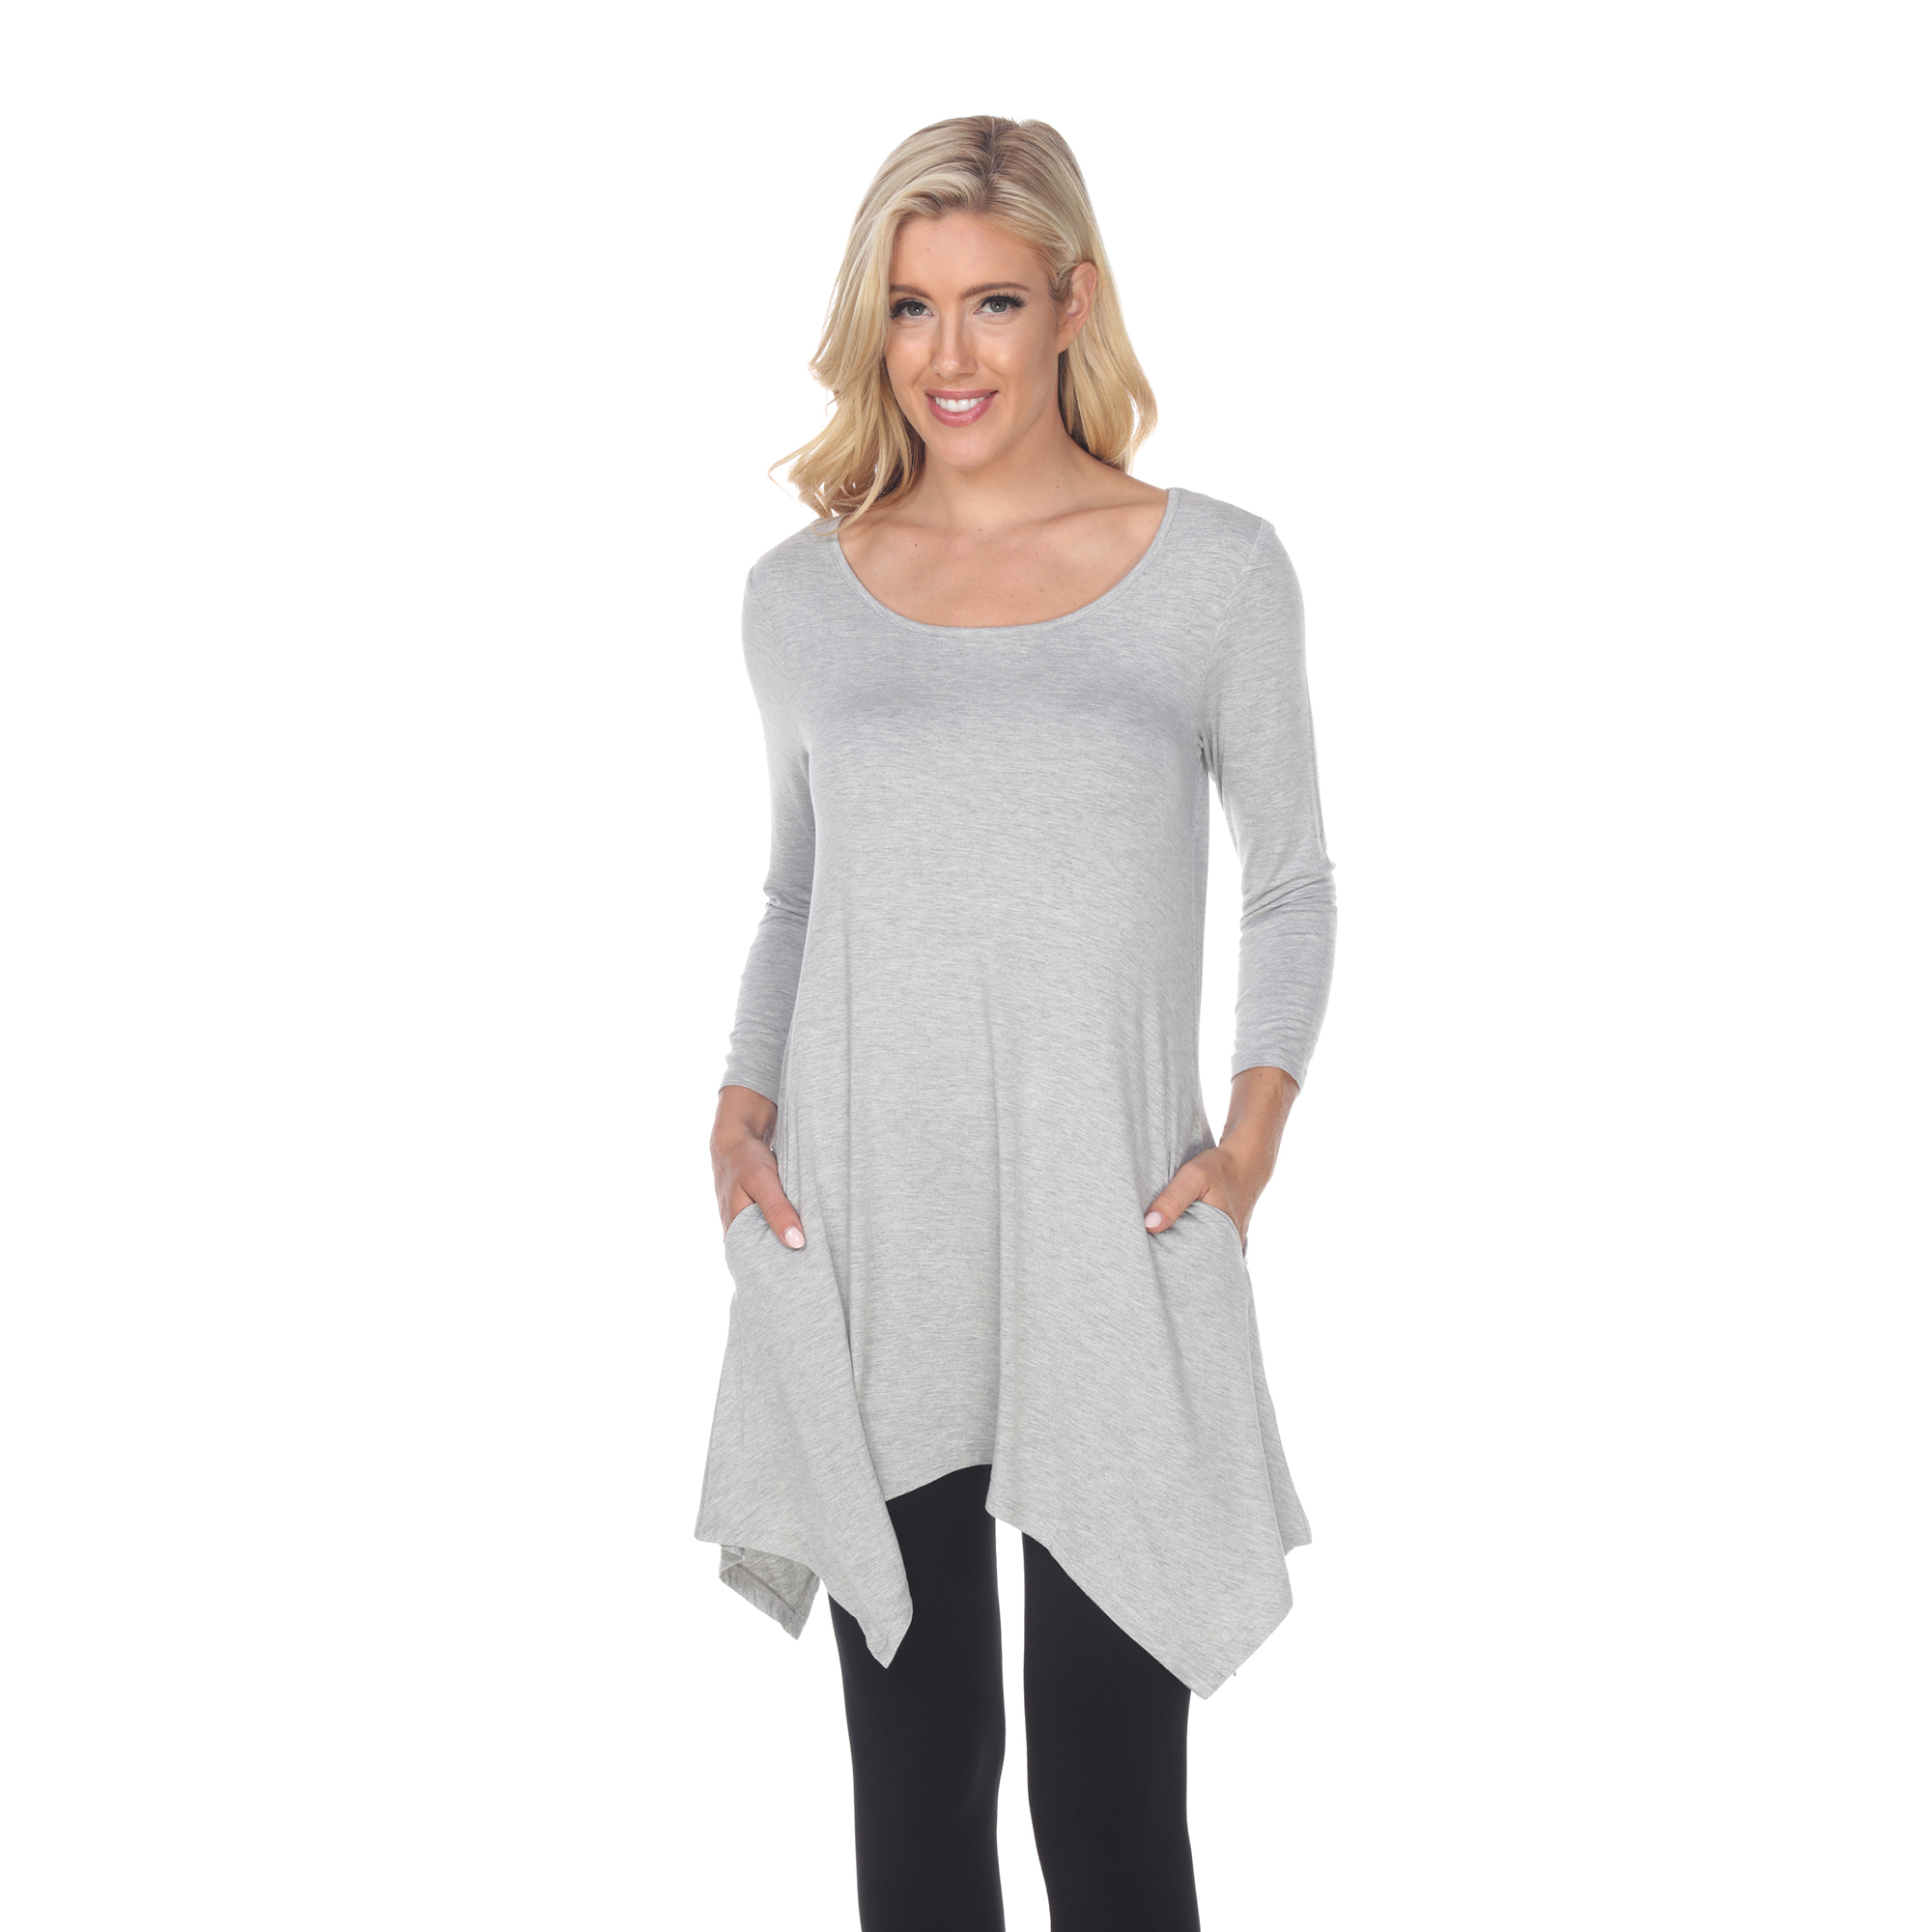 White Mark Women's Quarter Sleeve Tunic Top With Pockets - Heather Grey, 5X